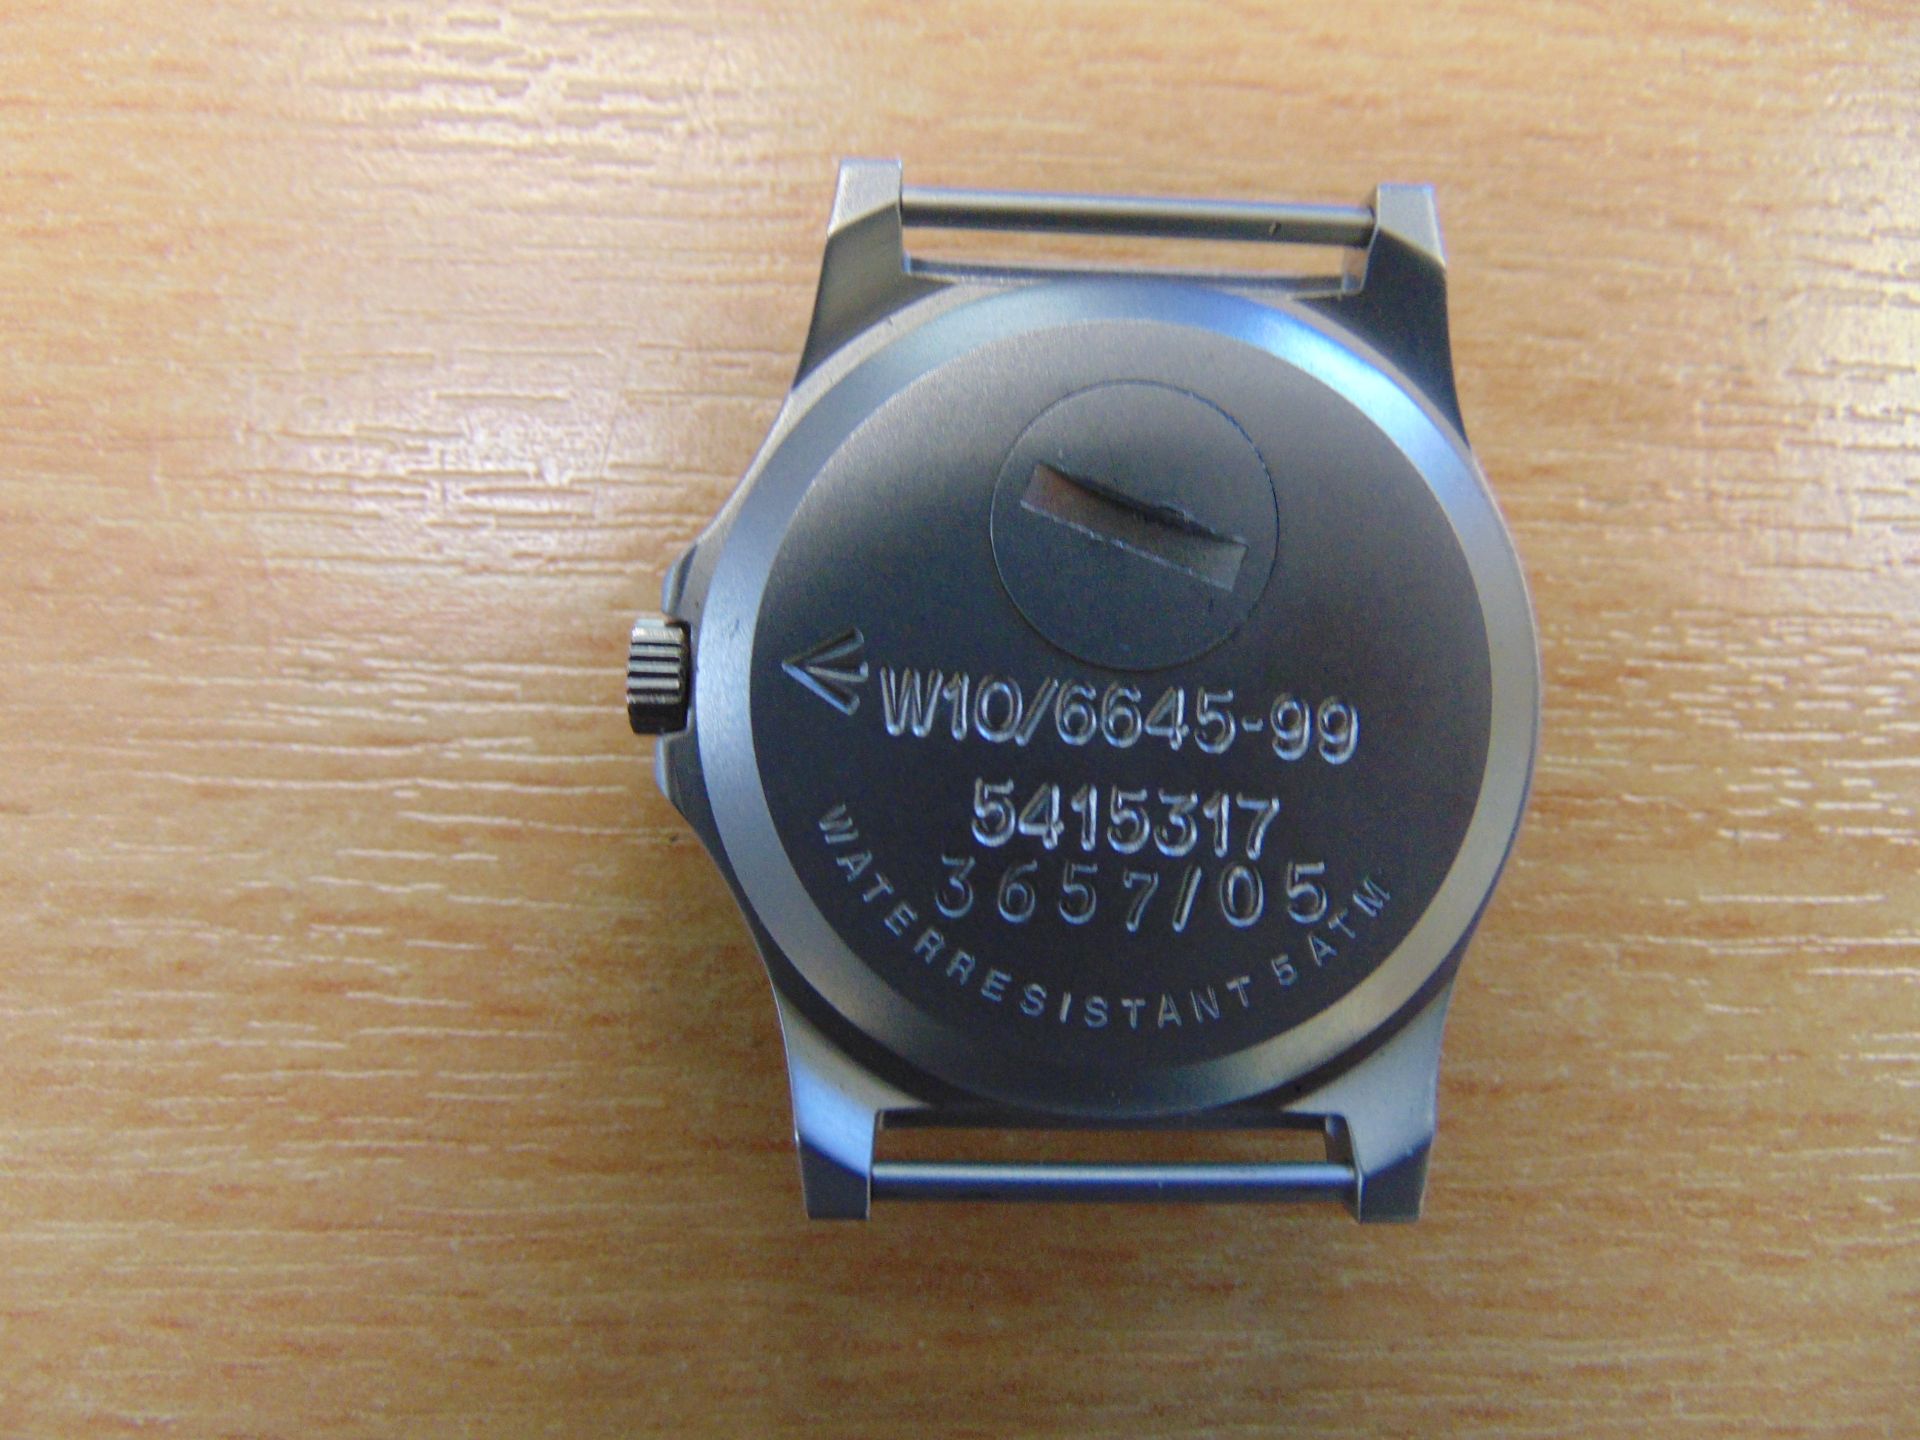 CWC W10 British Army Service Watch Unissued Condition, Water Resistant to 5ATM, Date 2005 - Image 5 of 6